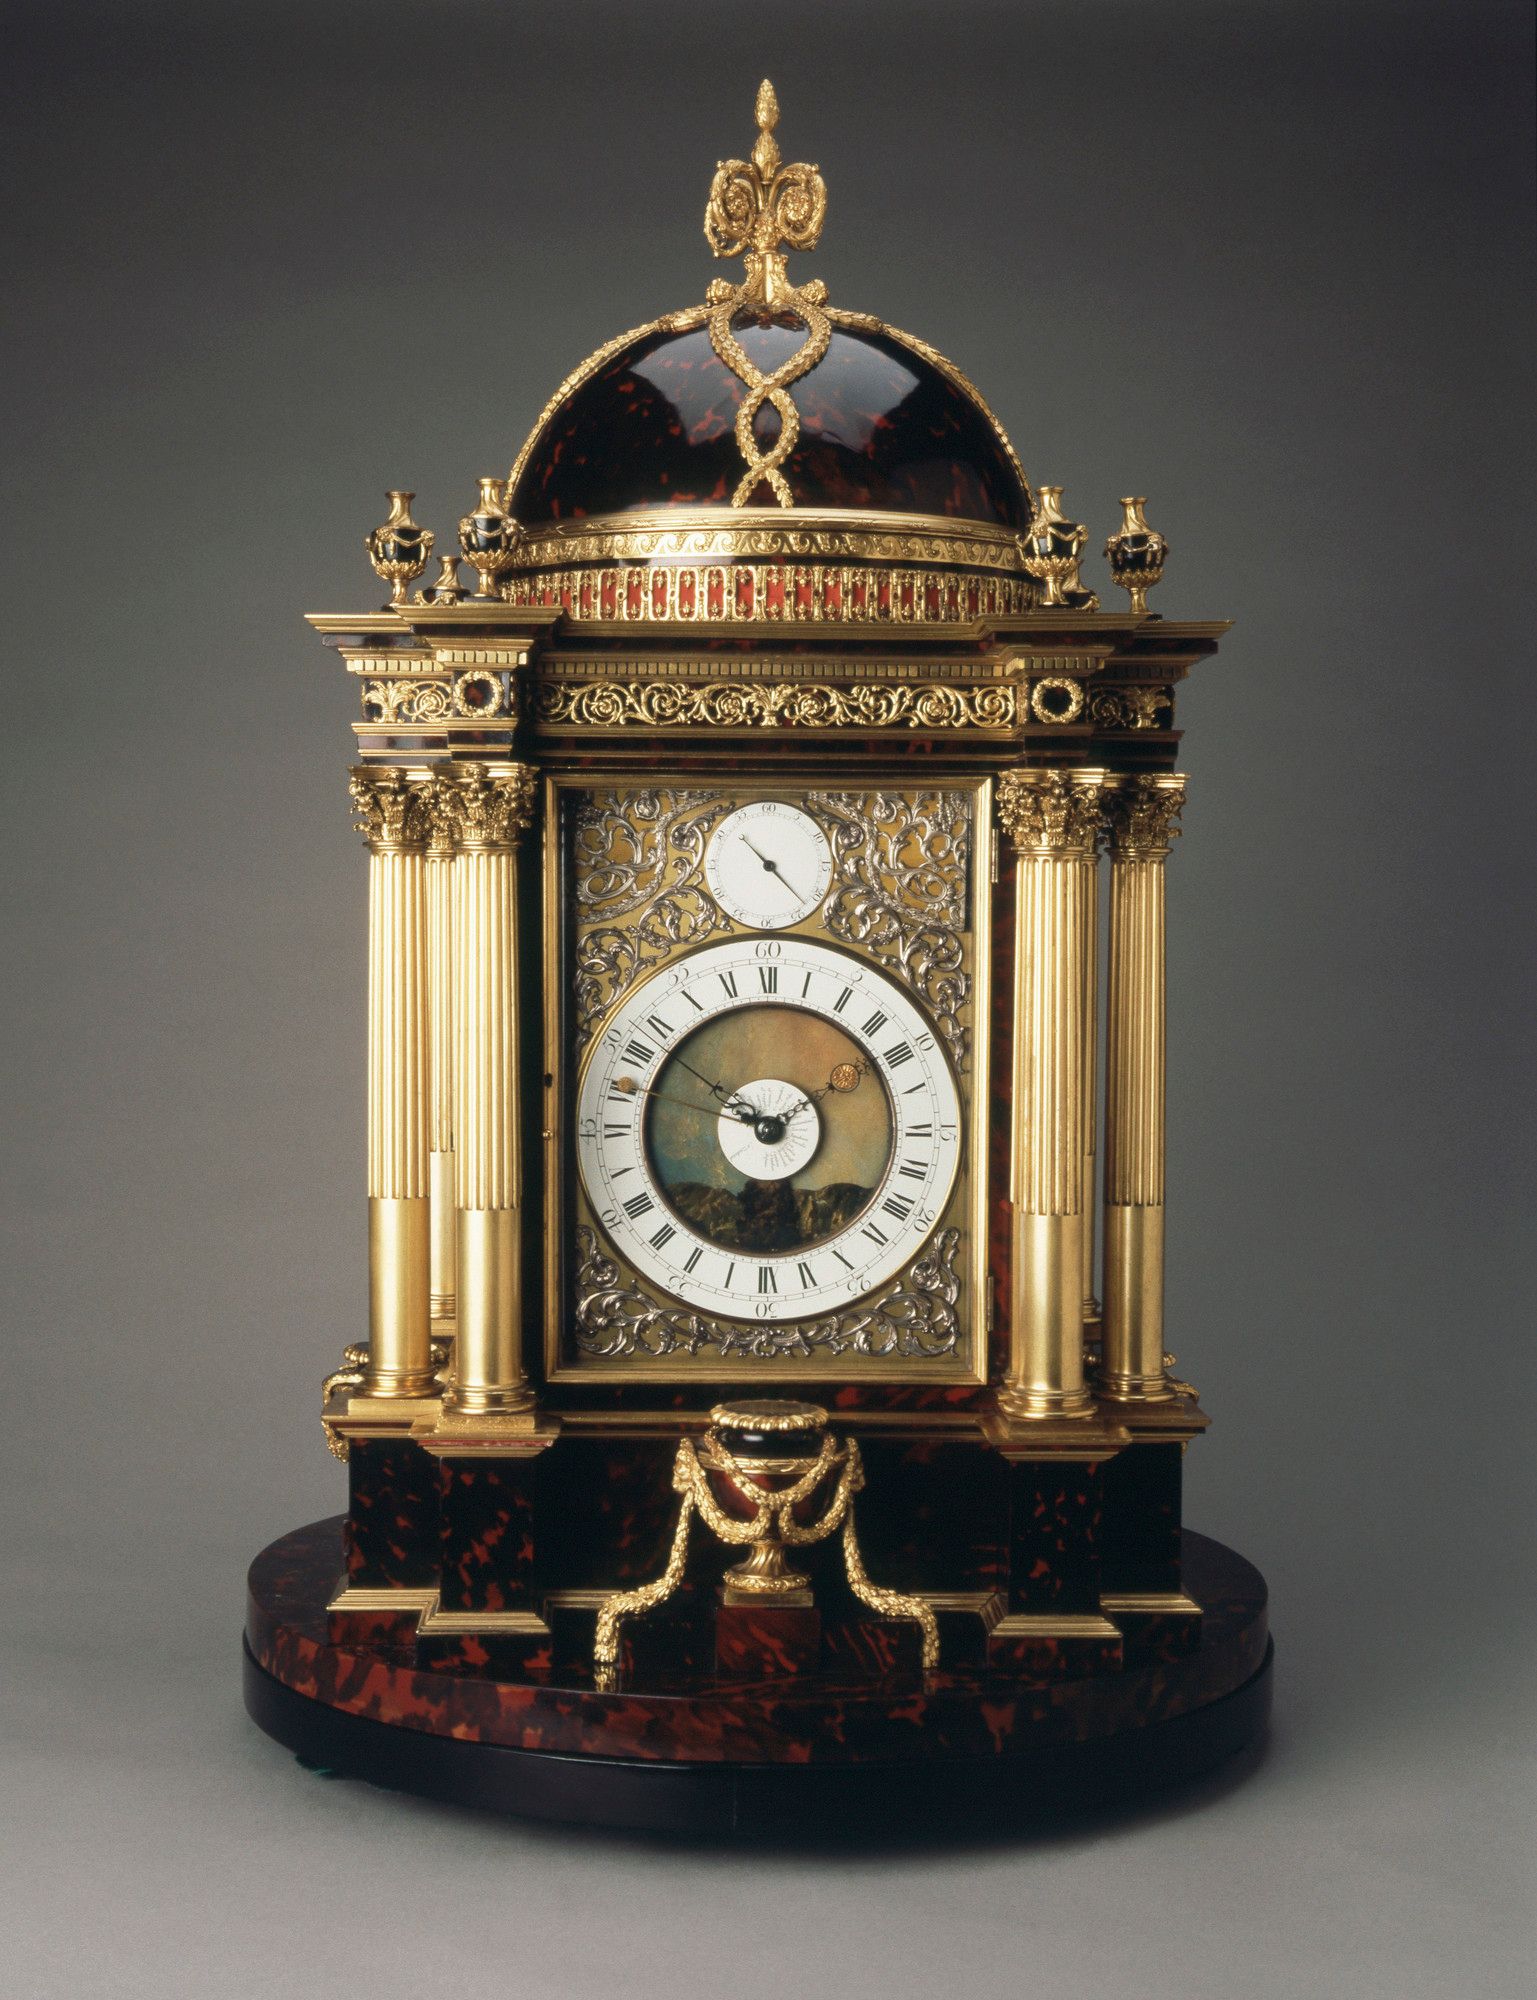 A clock made by Christopher Pinchbeck, from the Royal Collection Trust.